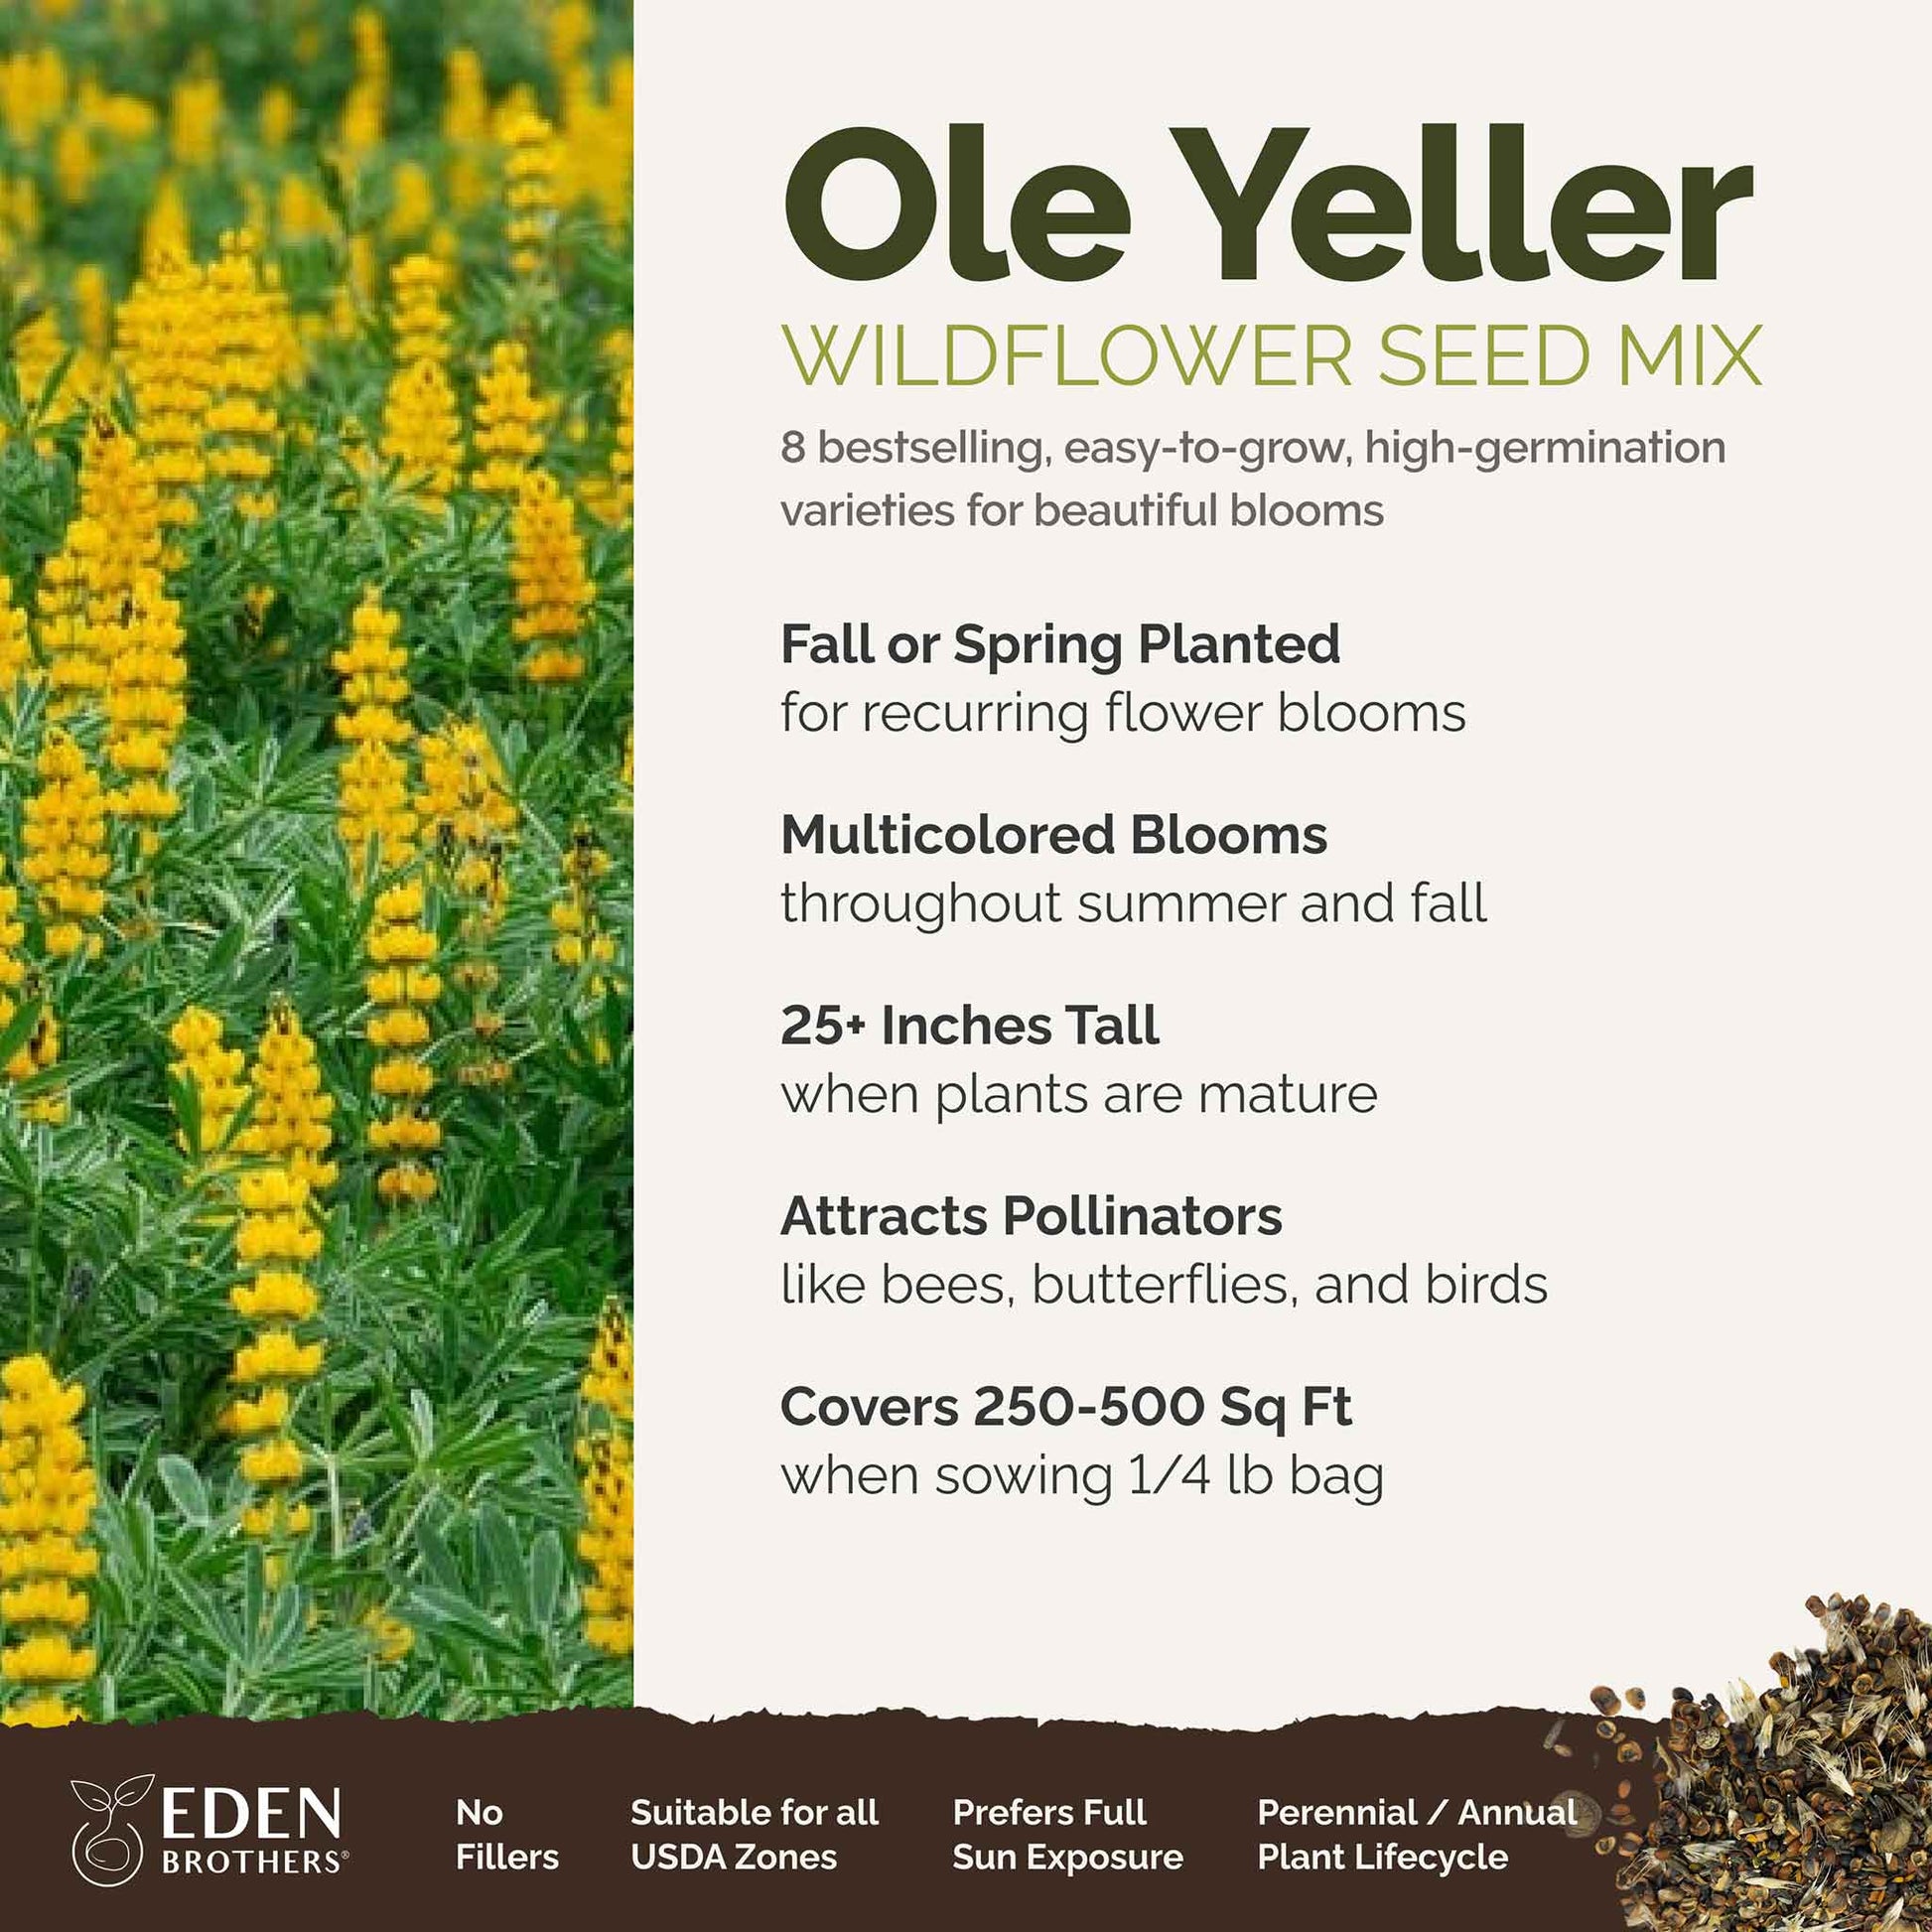 ole yeller overview